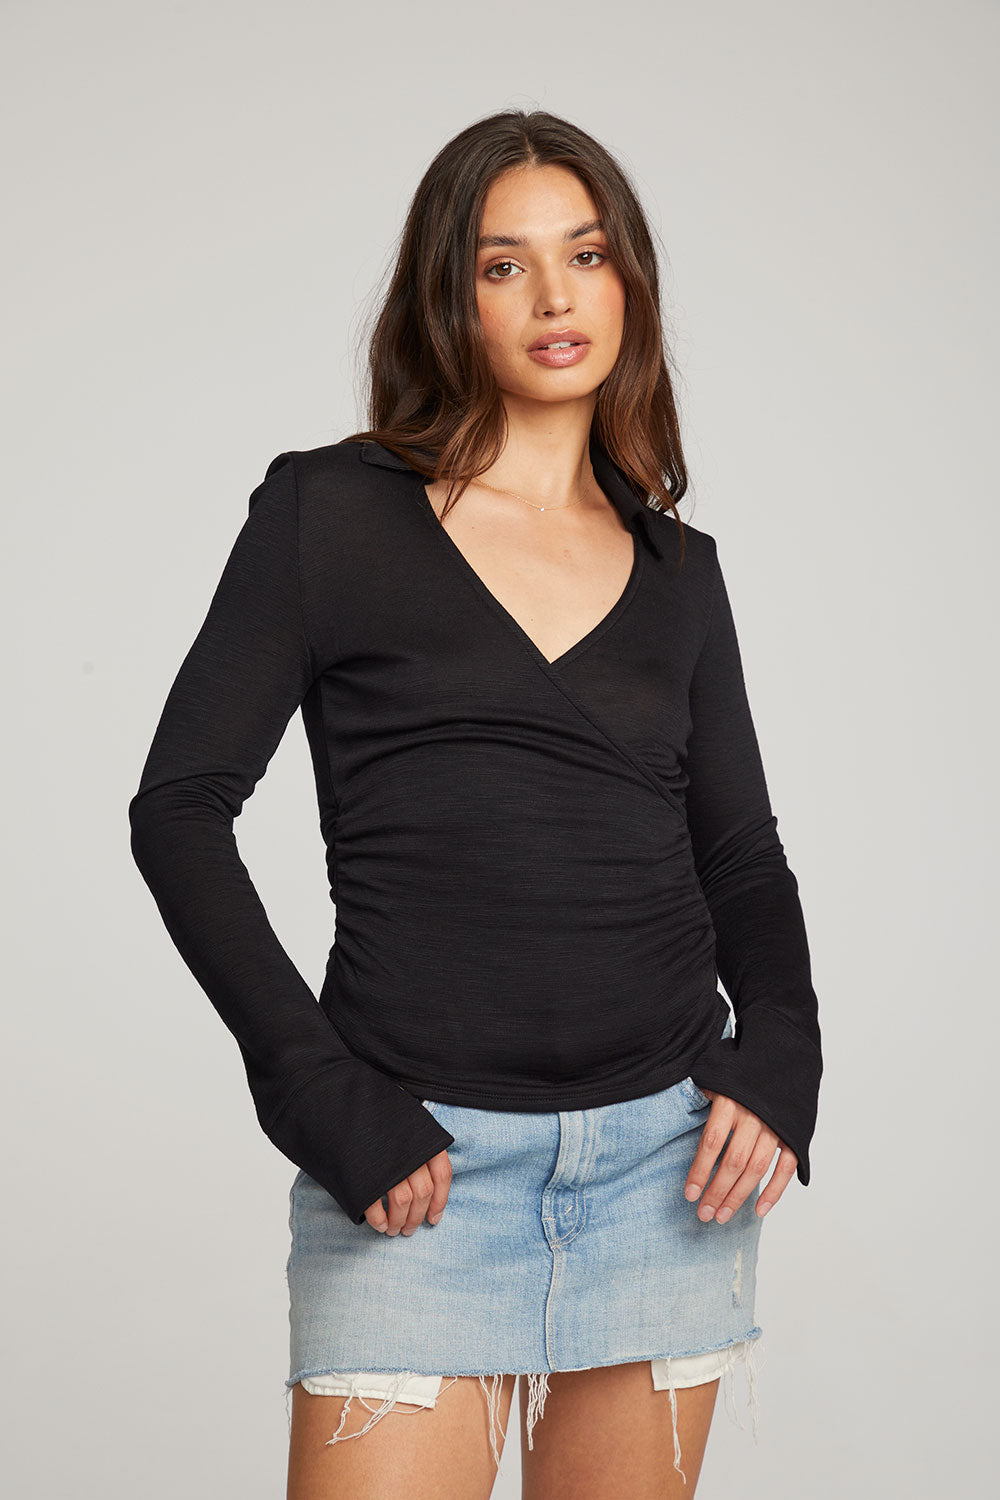 Harper Licorice Long Sleeve WOMENS chaserbrand